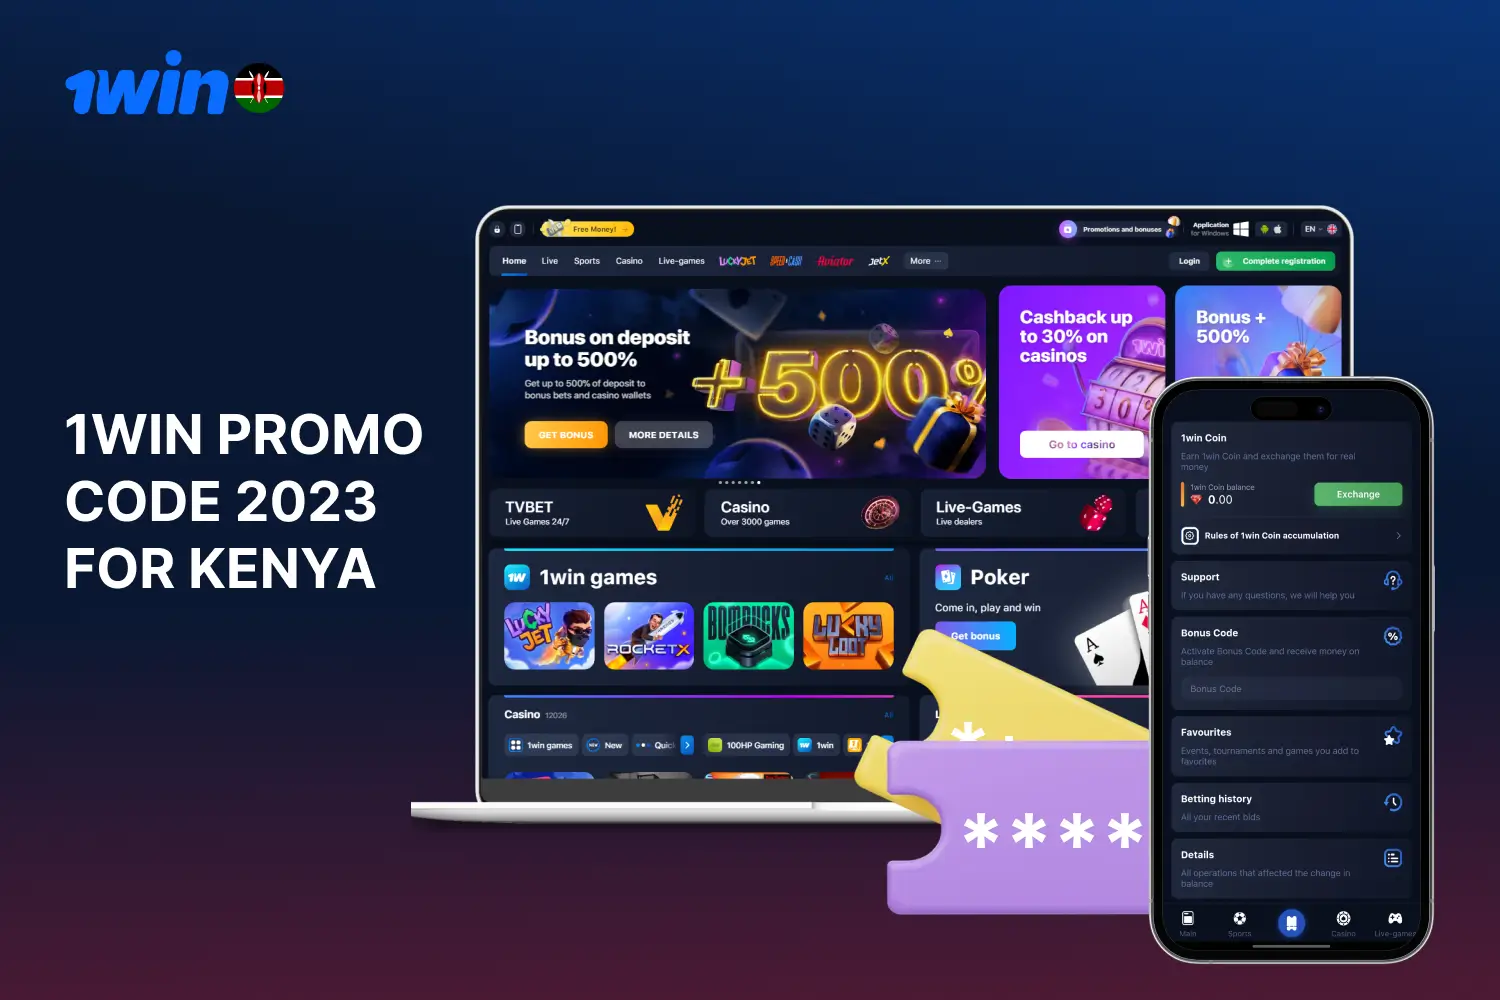 All new 1win users from Kenya can use a promo code and receive a bonus